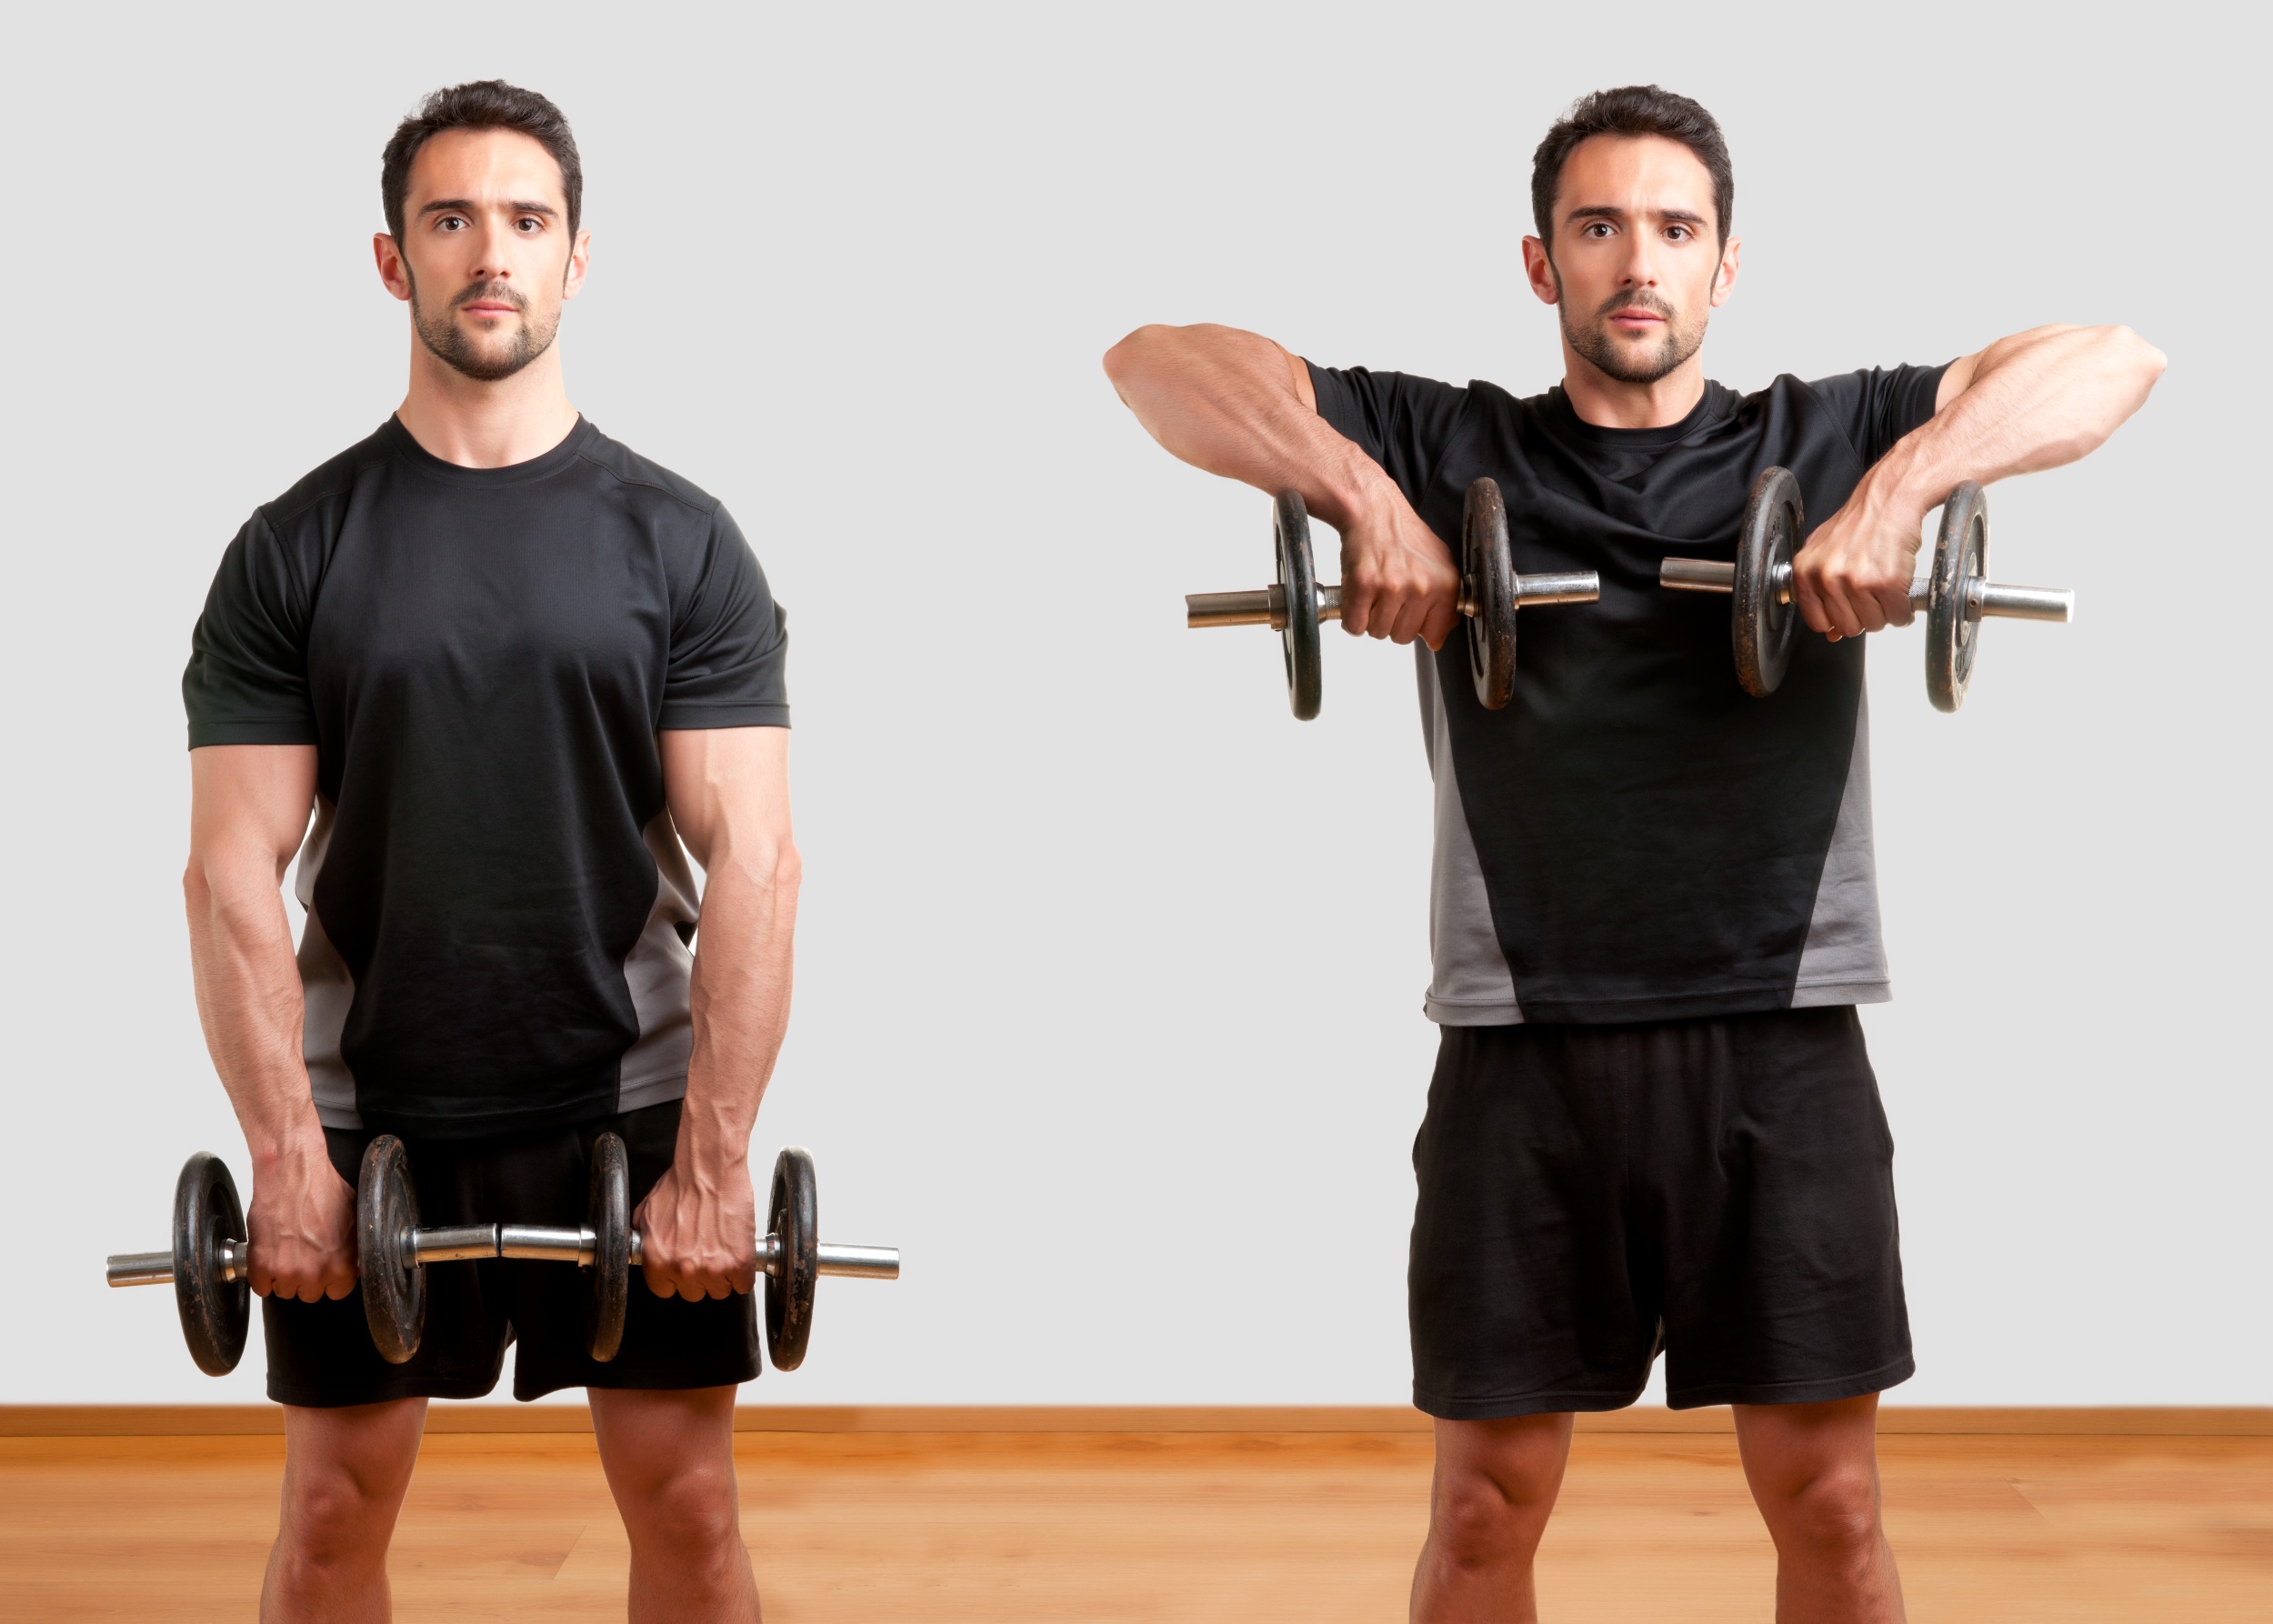 Adobe image man wearing black shorts doing upright row exercise with dumbbell in gym on wooden floor white background